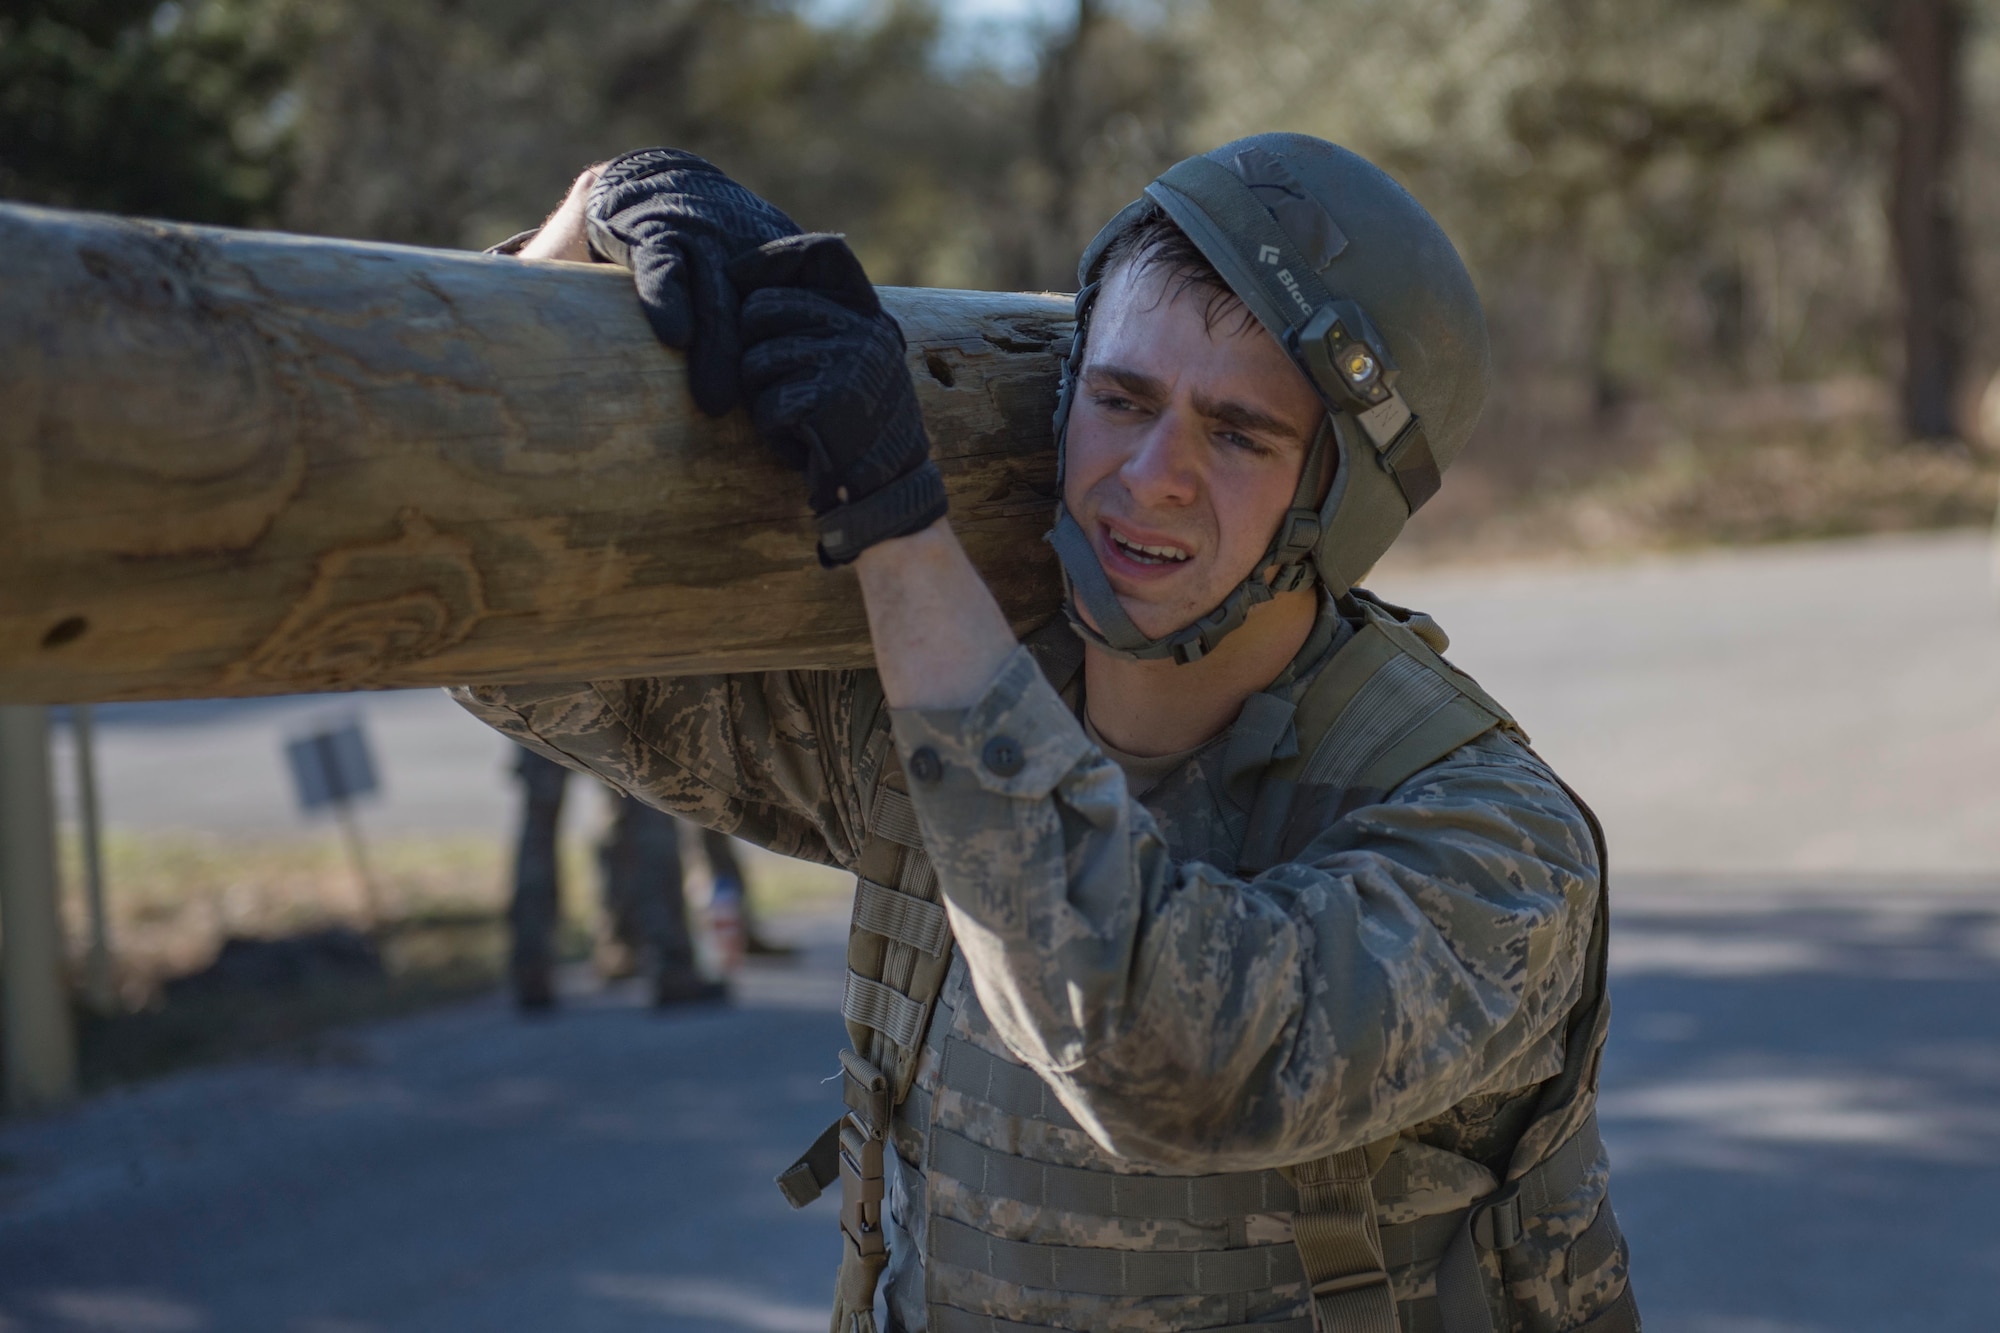 Air Force Academy Cadet Ervin carries a log over his shoulder during a medical evacuation march at an Air Liaison Officer Aptitude assessment, Feb. 16, 2016, at Camp Bullis, Tx. The week-long assessment allows current ALOs and enlisted cadre to decide if the cadets are worthy of progressing to the Tactical Air Control Party schoolhouse. (U.S. Air Force photo by Airman 1st Class Daniel Snider)